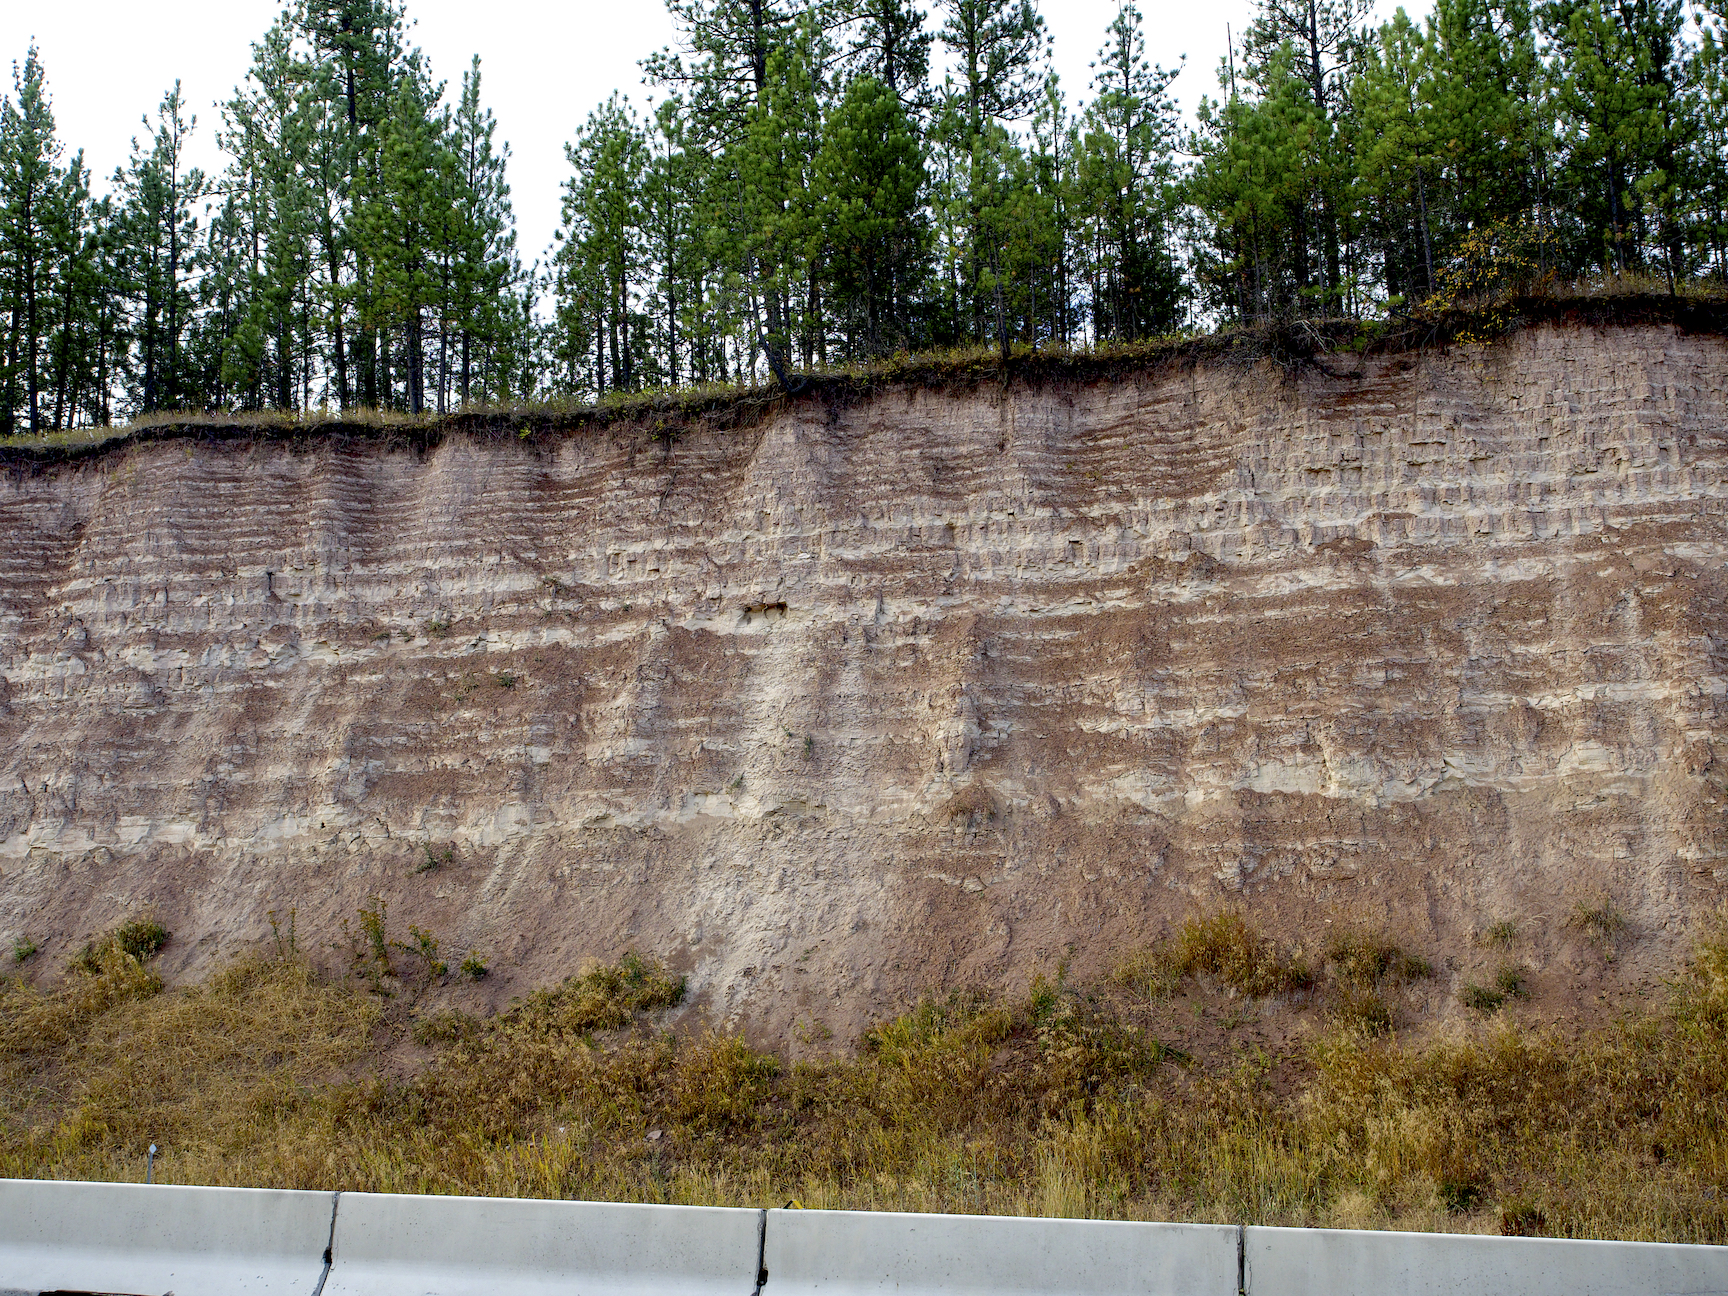 Zebra stripes in a deposit that once formed on the lake bottom.